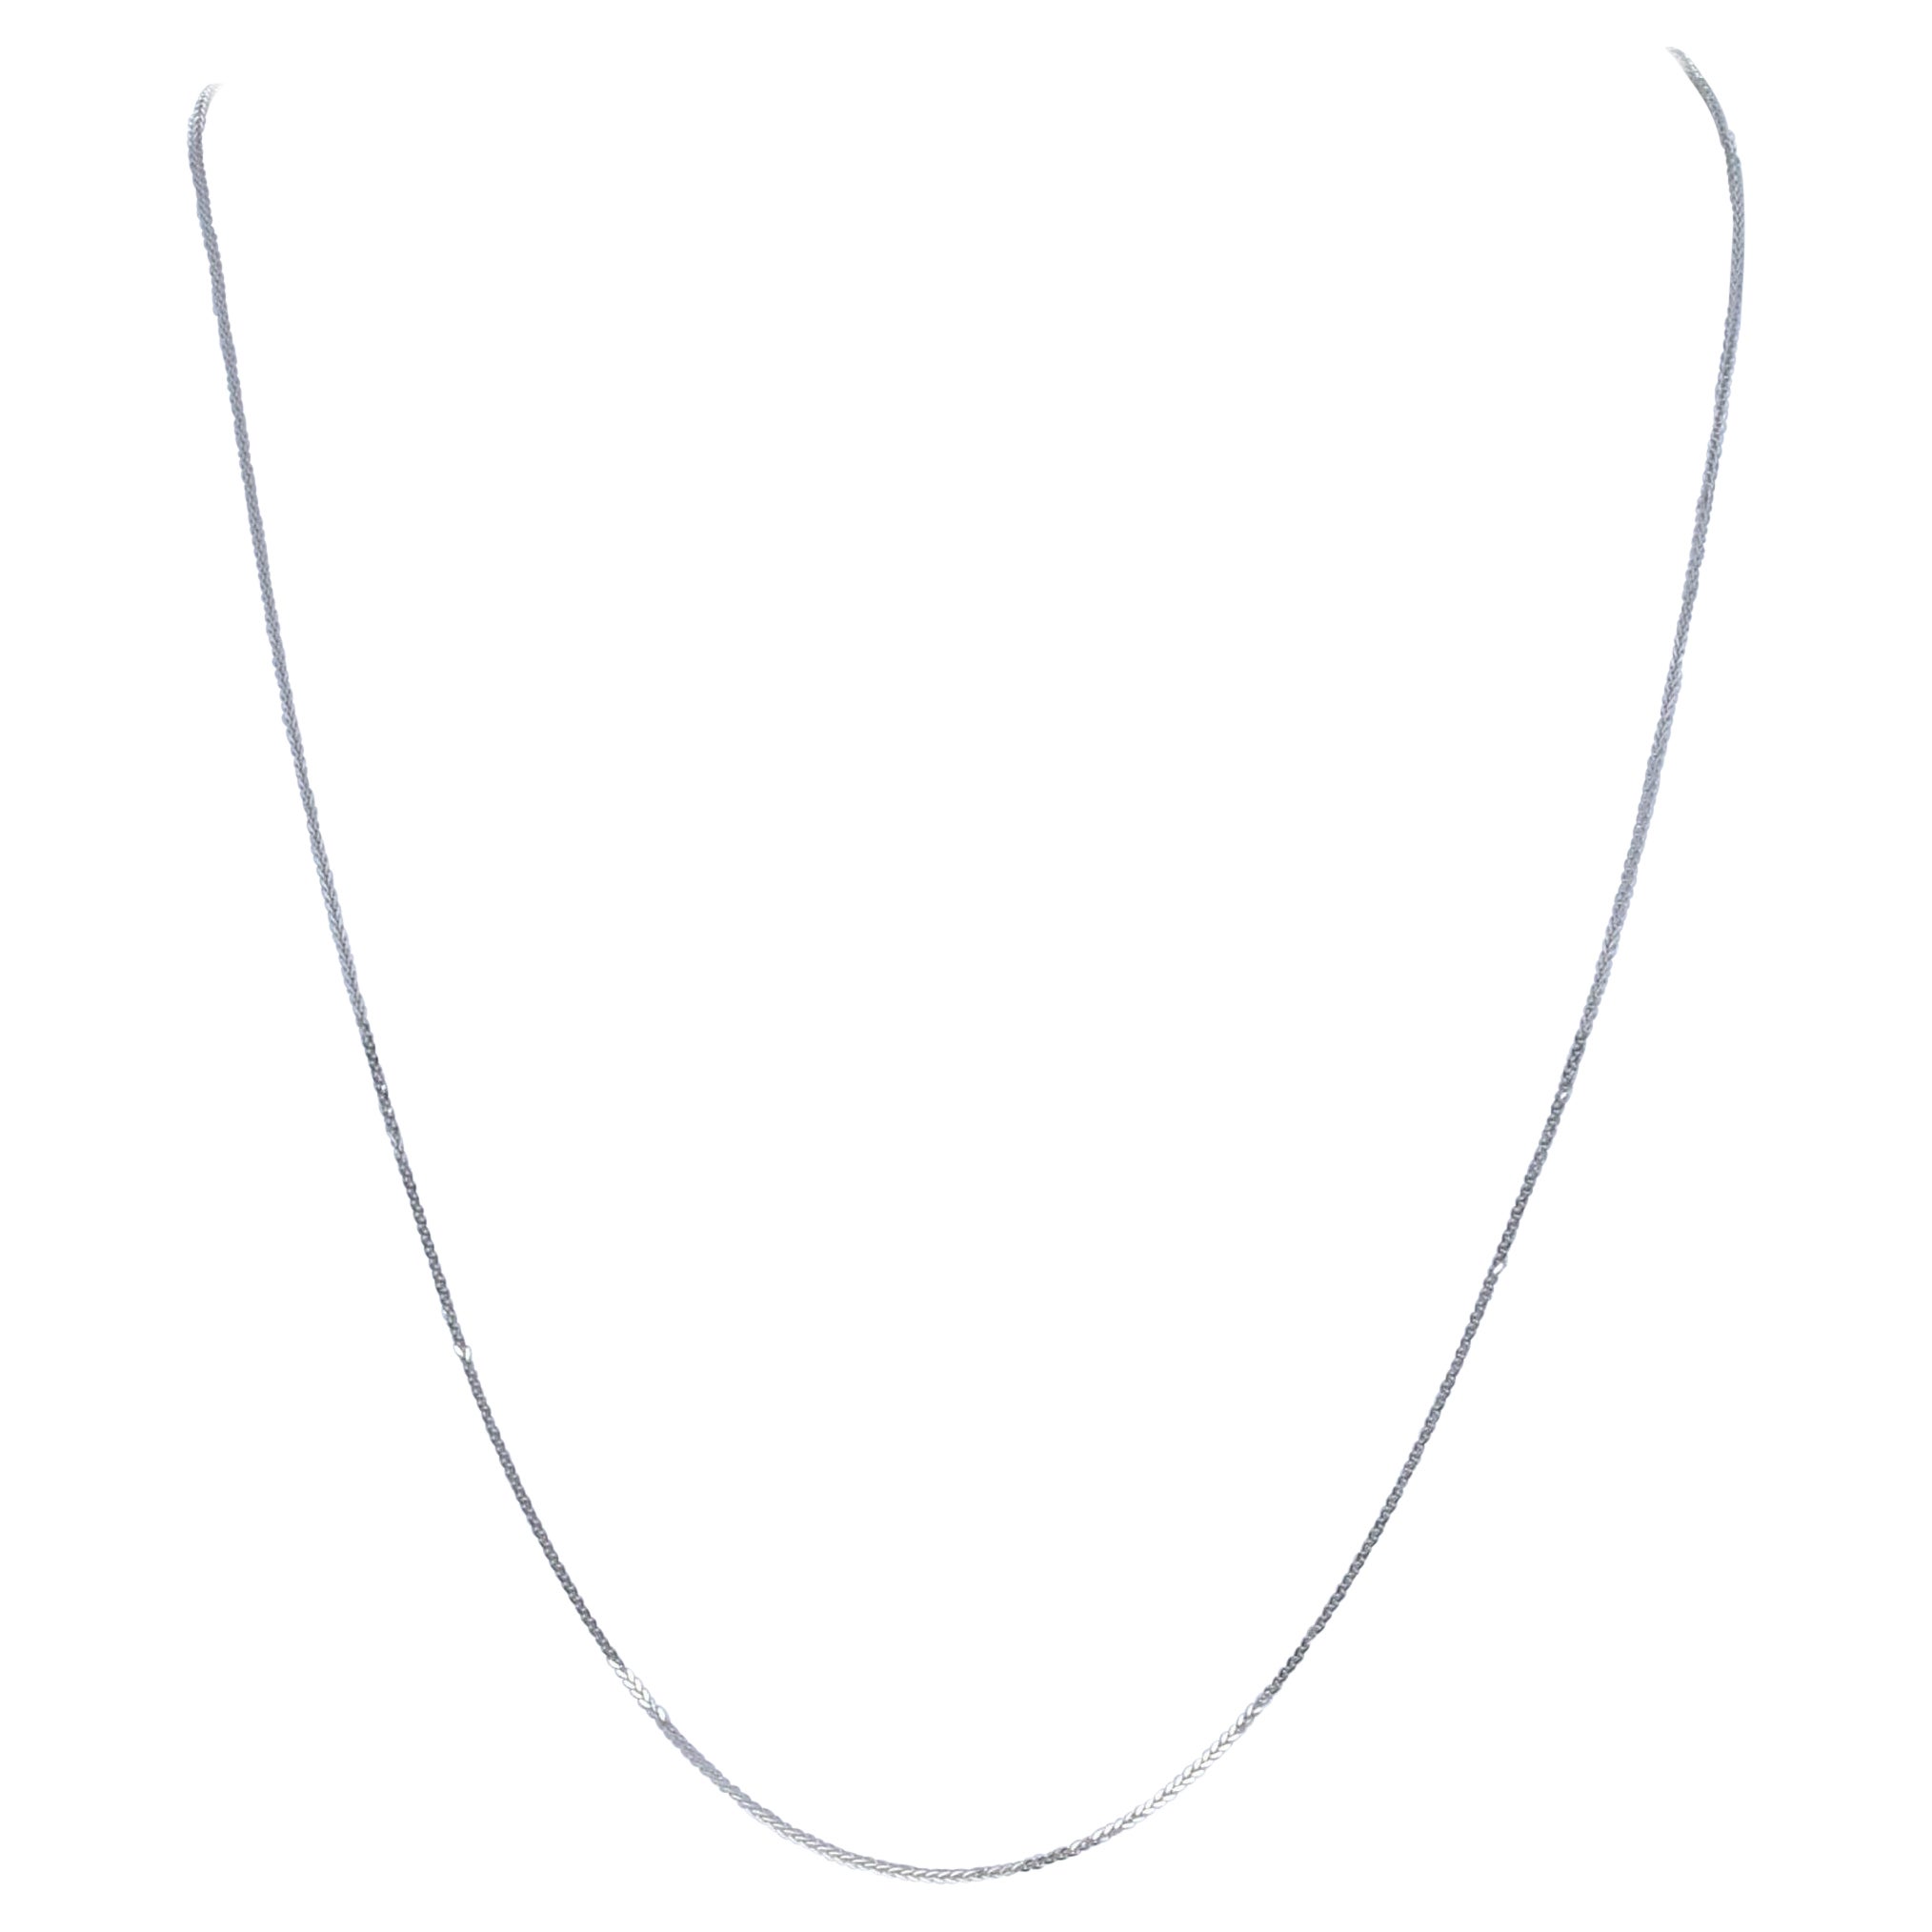 White Gold Diamond Cut Squared Wheat Chain Necklace, 14k Lobster Claw Clasp